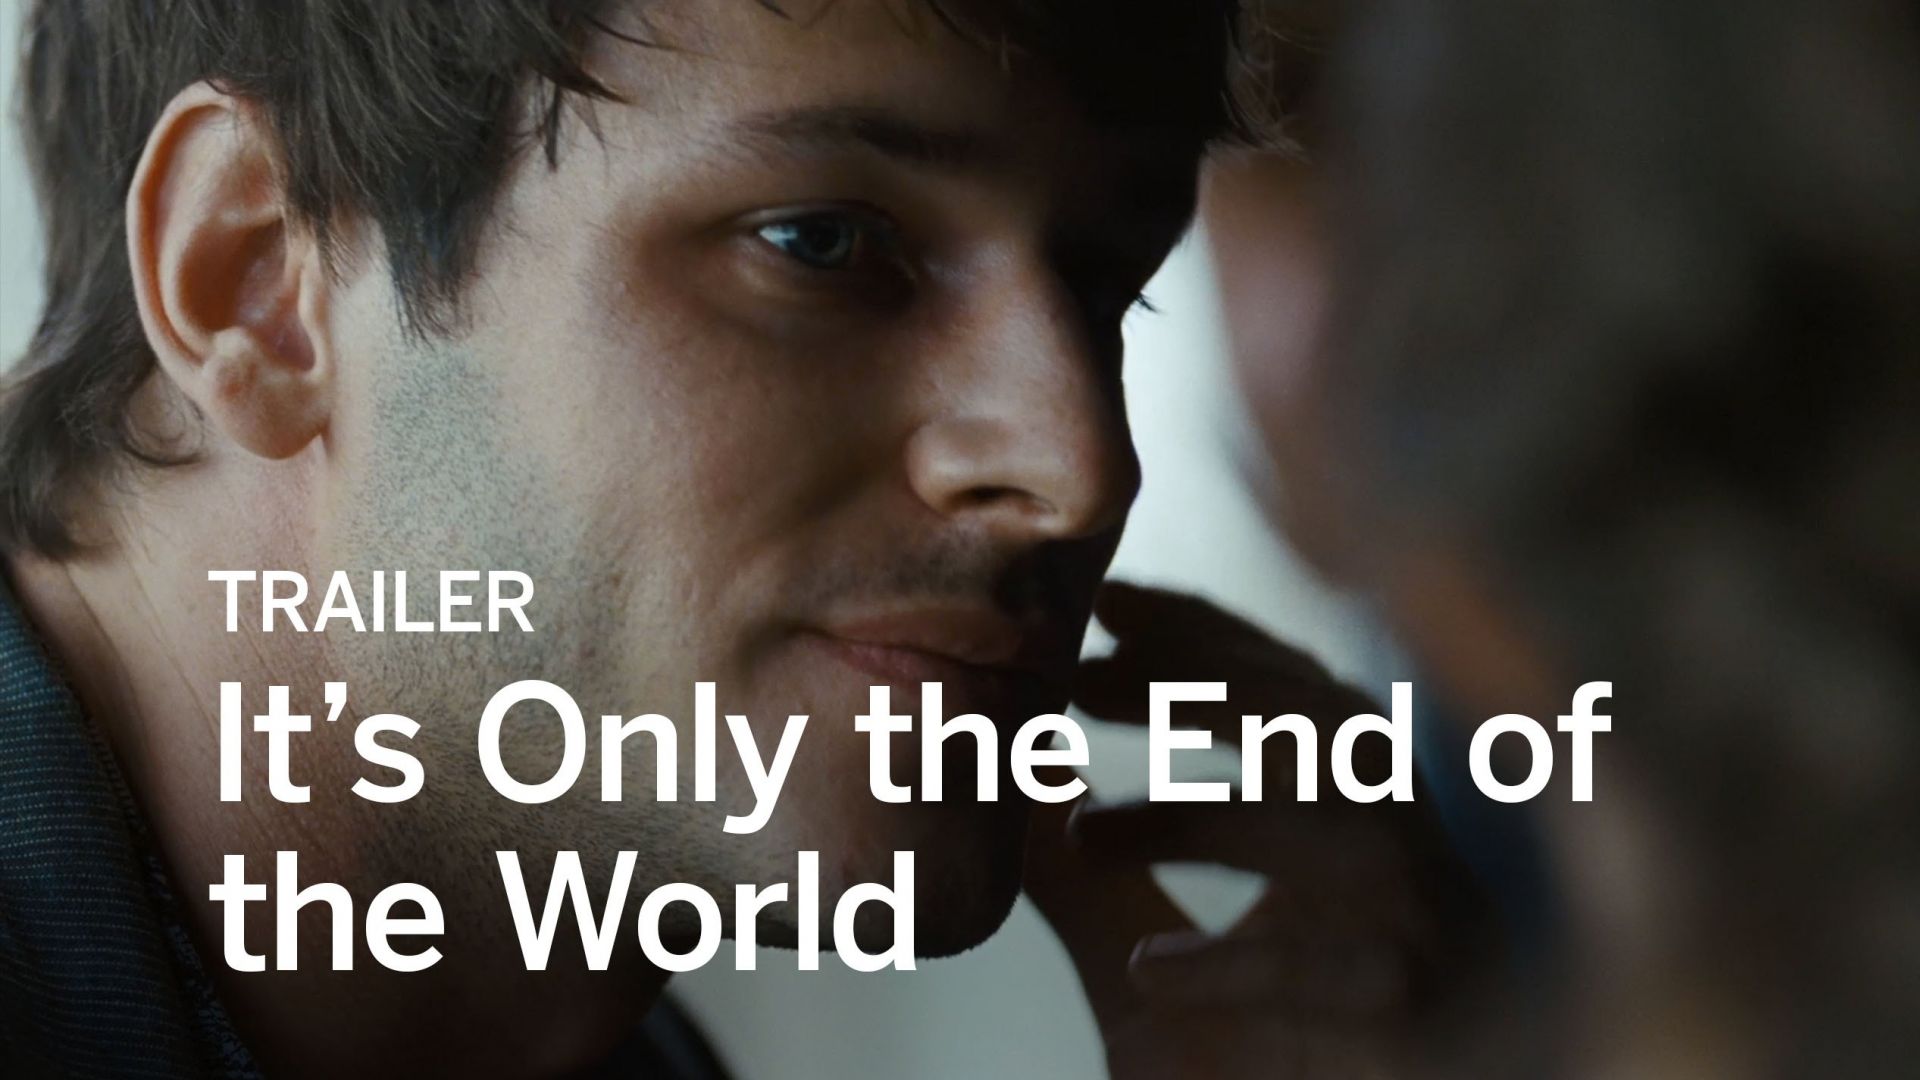 'It's Only The End of The World' Trailer